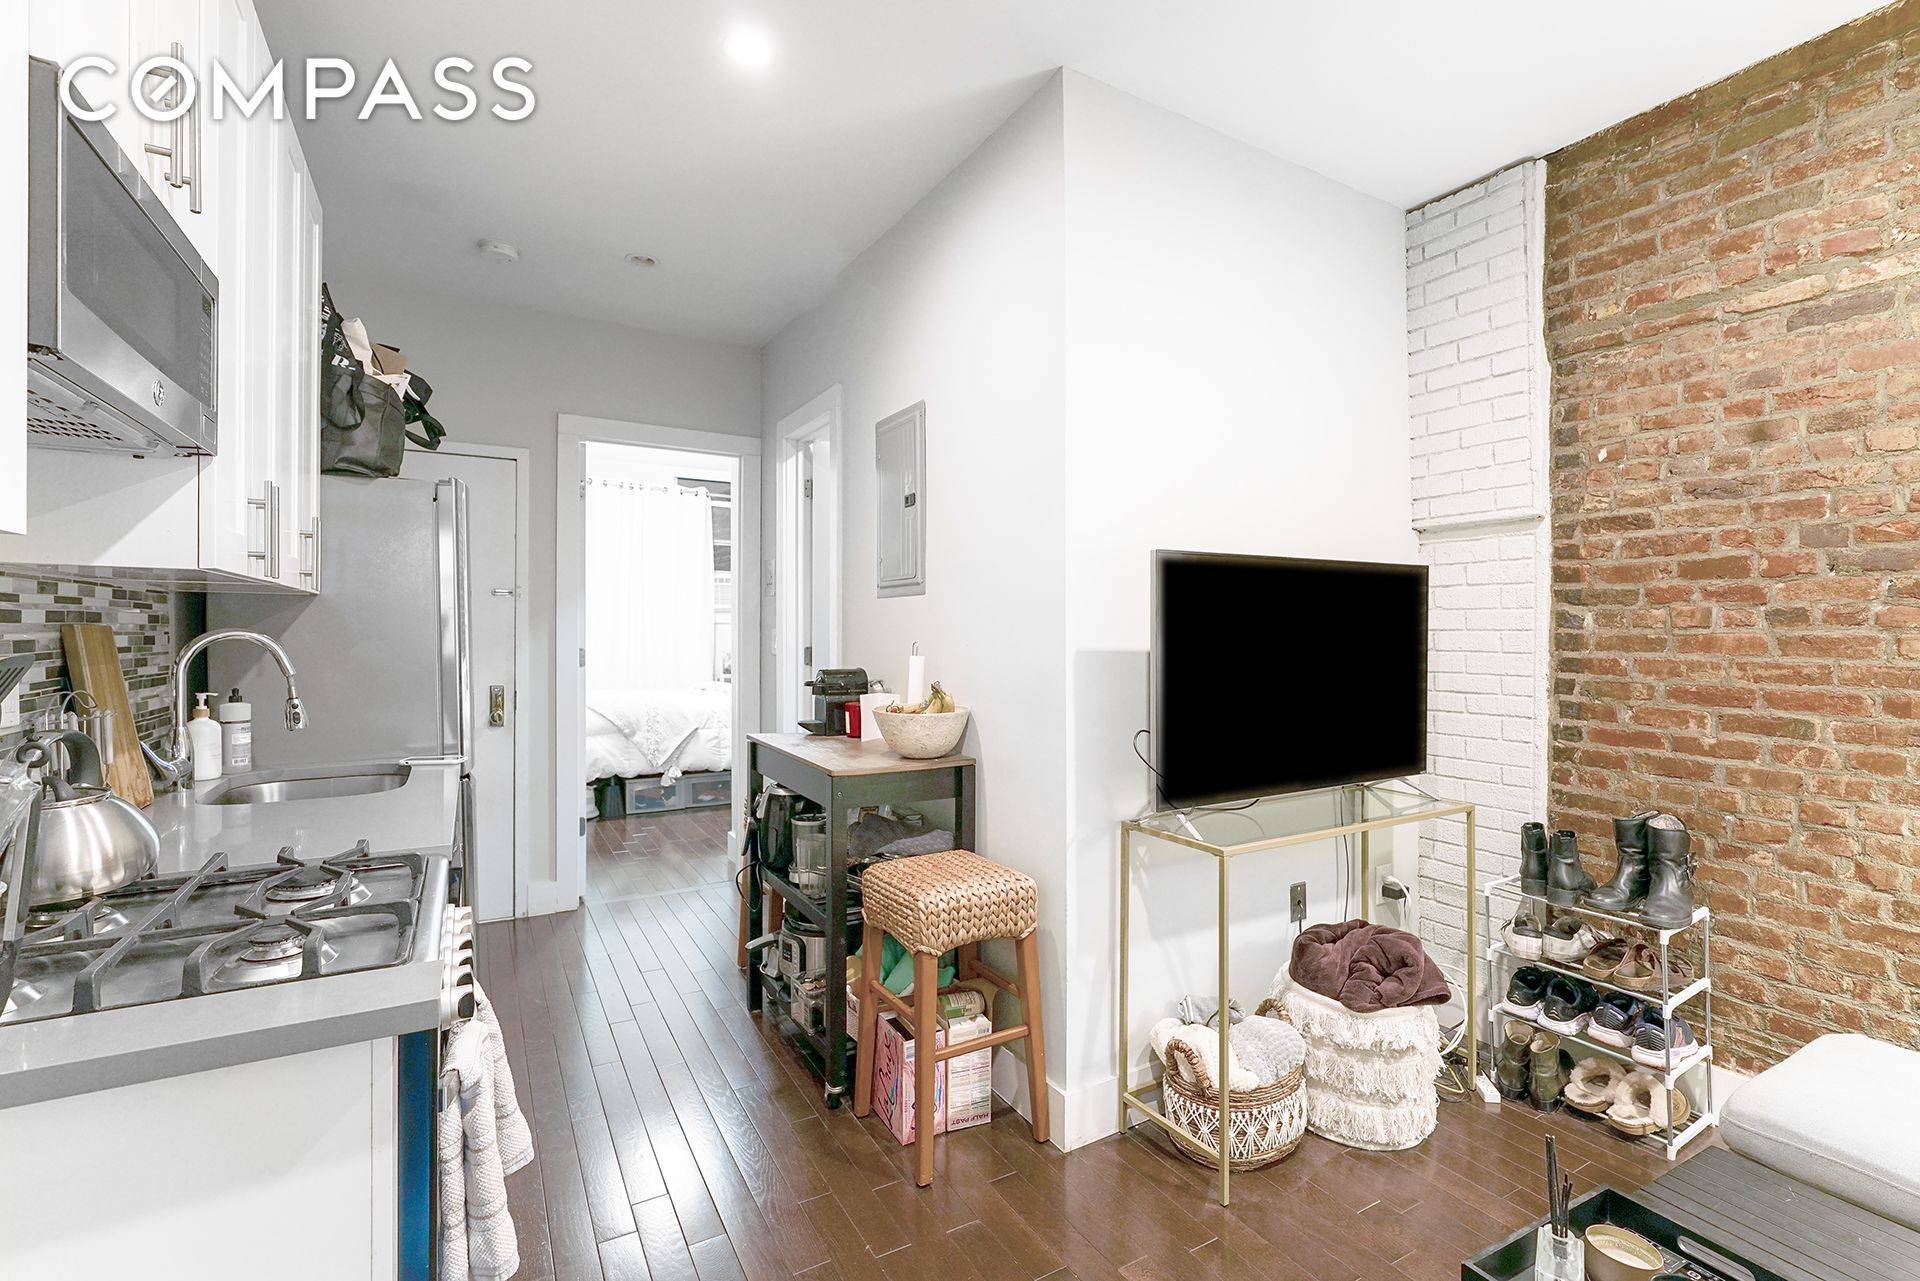 Prime Nolita SoHo 2 bedroom with 1 bath Renovated kitchen and stainless steel appliances.